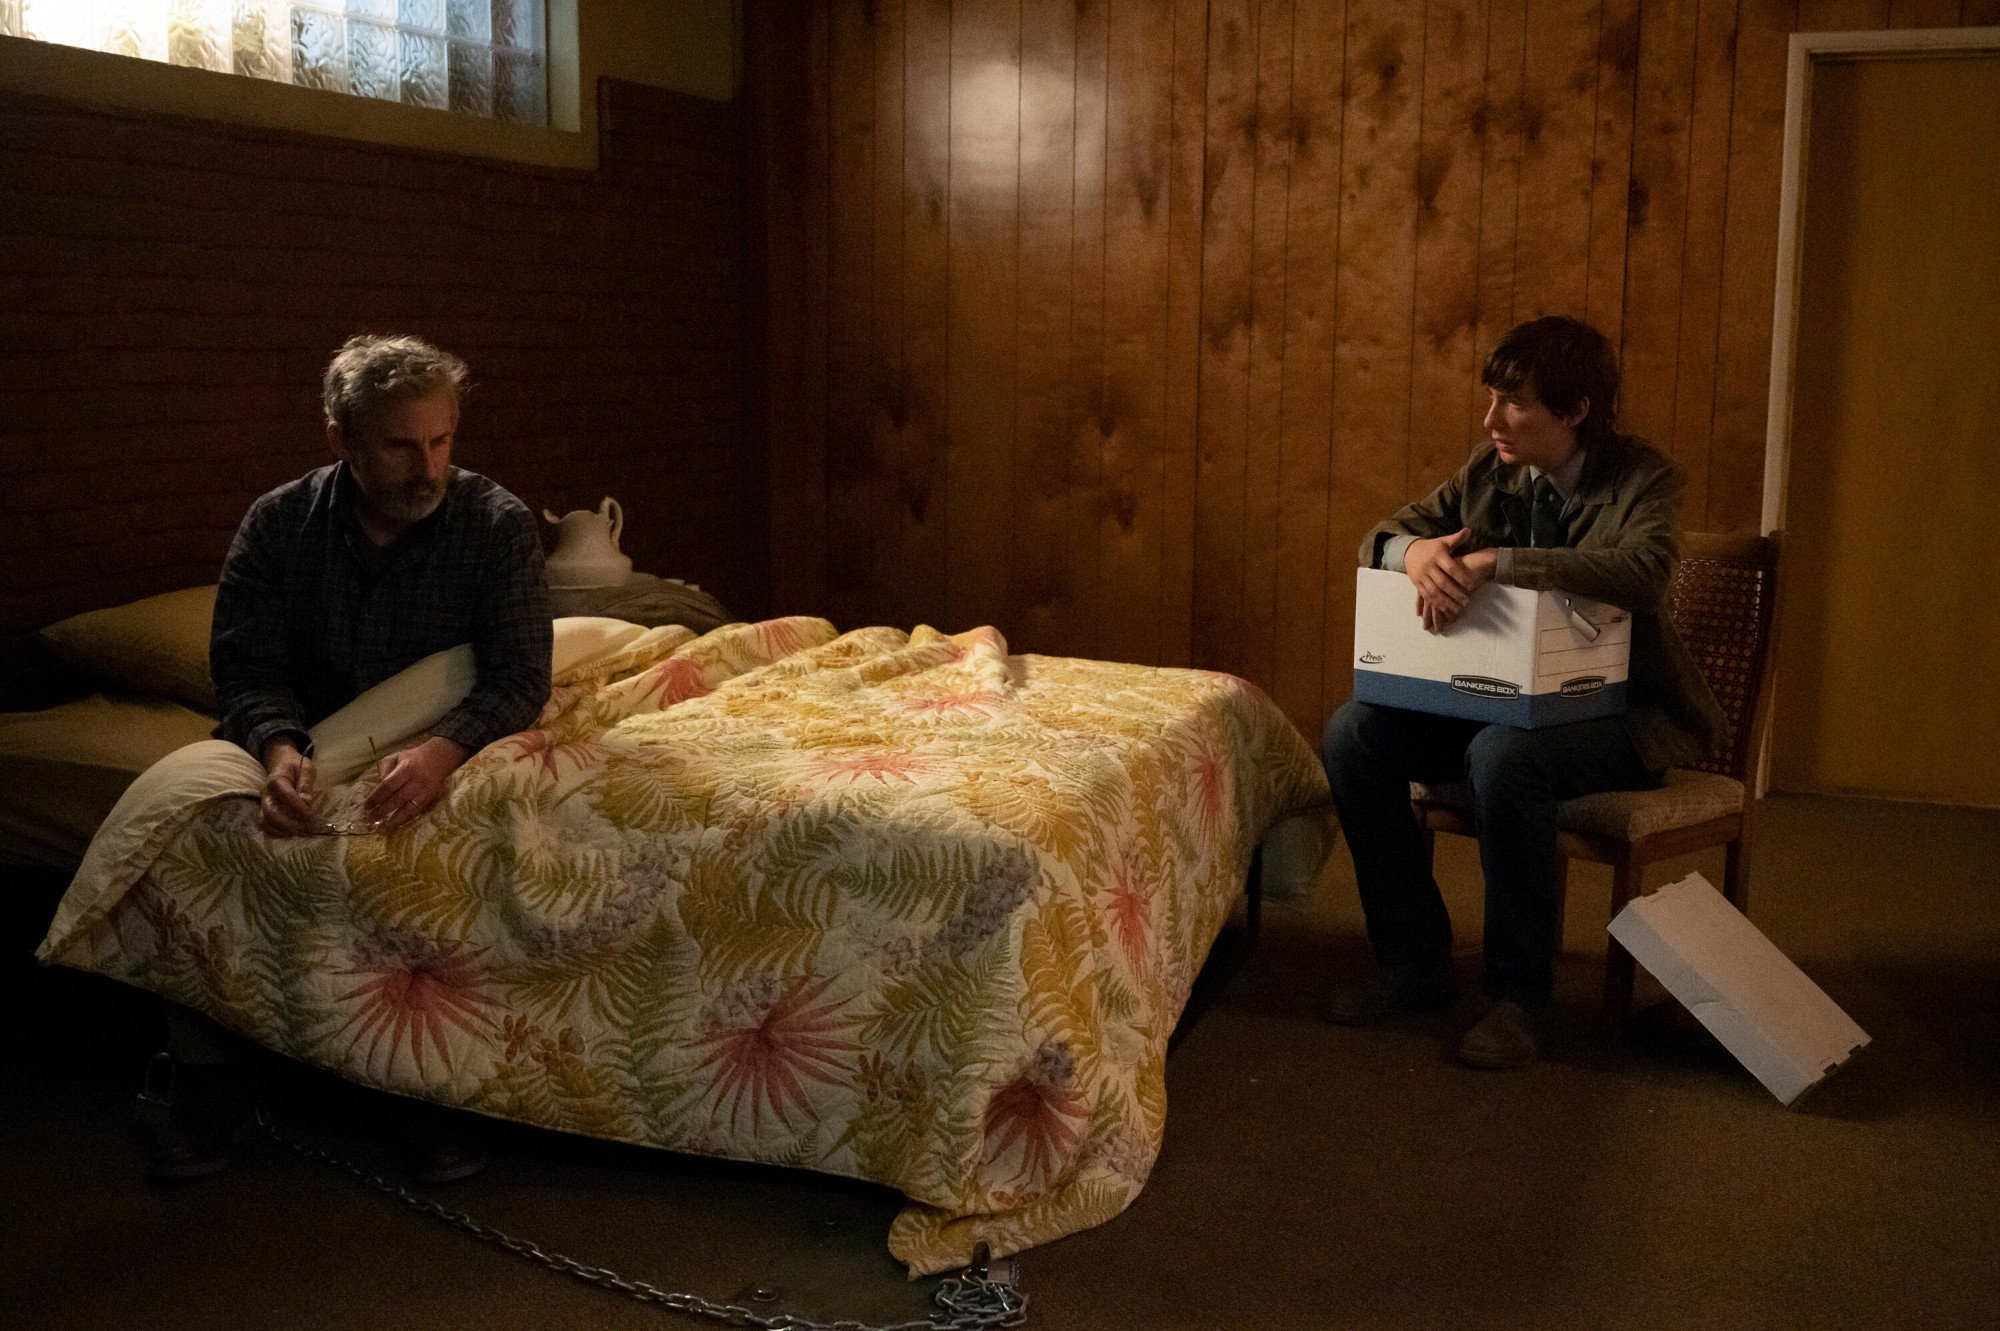 Steve Carell and Domhnall Gleeson in 'The Patient,' which will drop episode 3 on Sept. 6. Carell's character is sitting beneath the covers in bed, and Gleeson's character is sitting on a chair next to the bed and holding a box.